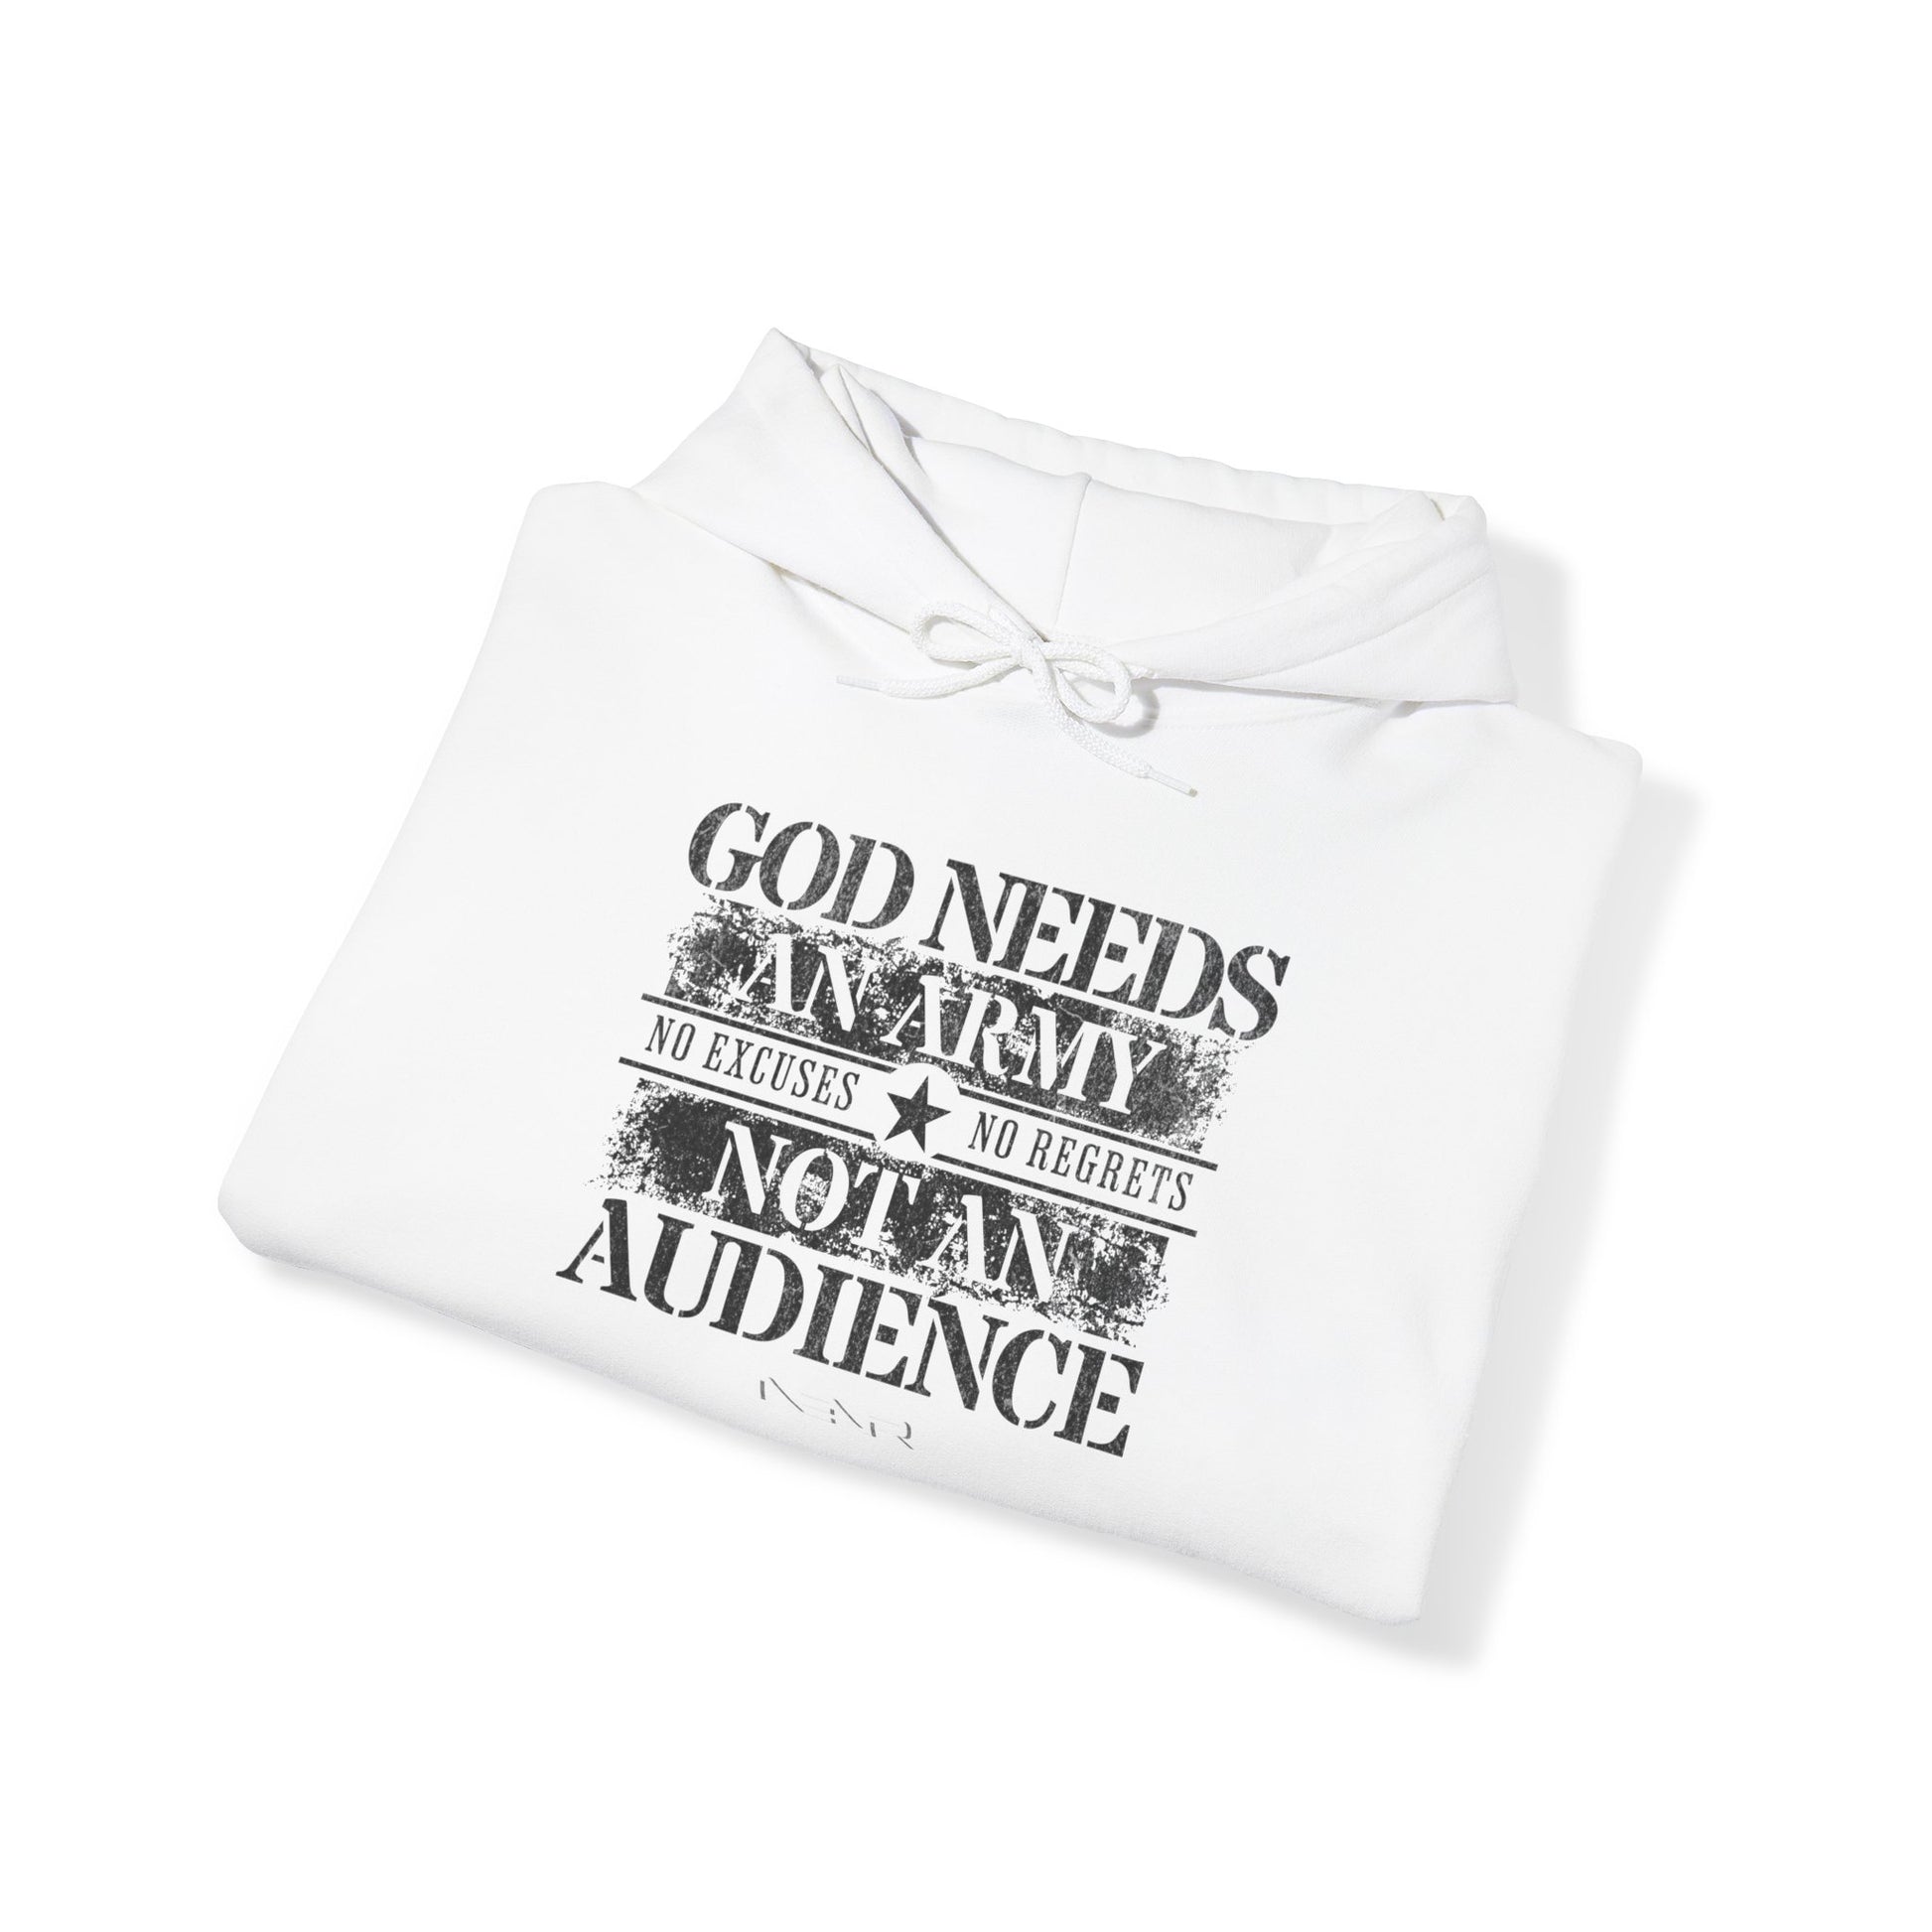 NO EXCUSES NO REGRETS ~ GOD NEEDS AN ARMY NOT AN AUDIENCE HOODIE